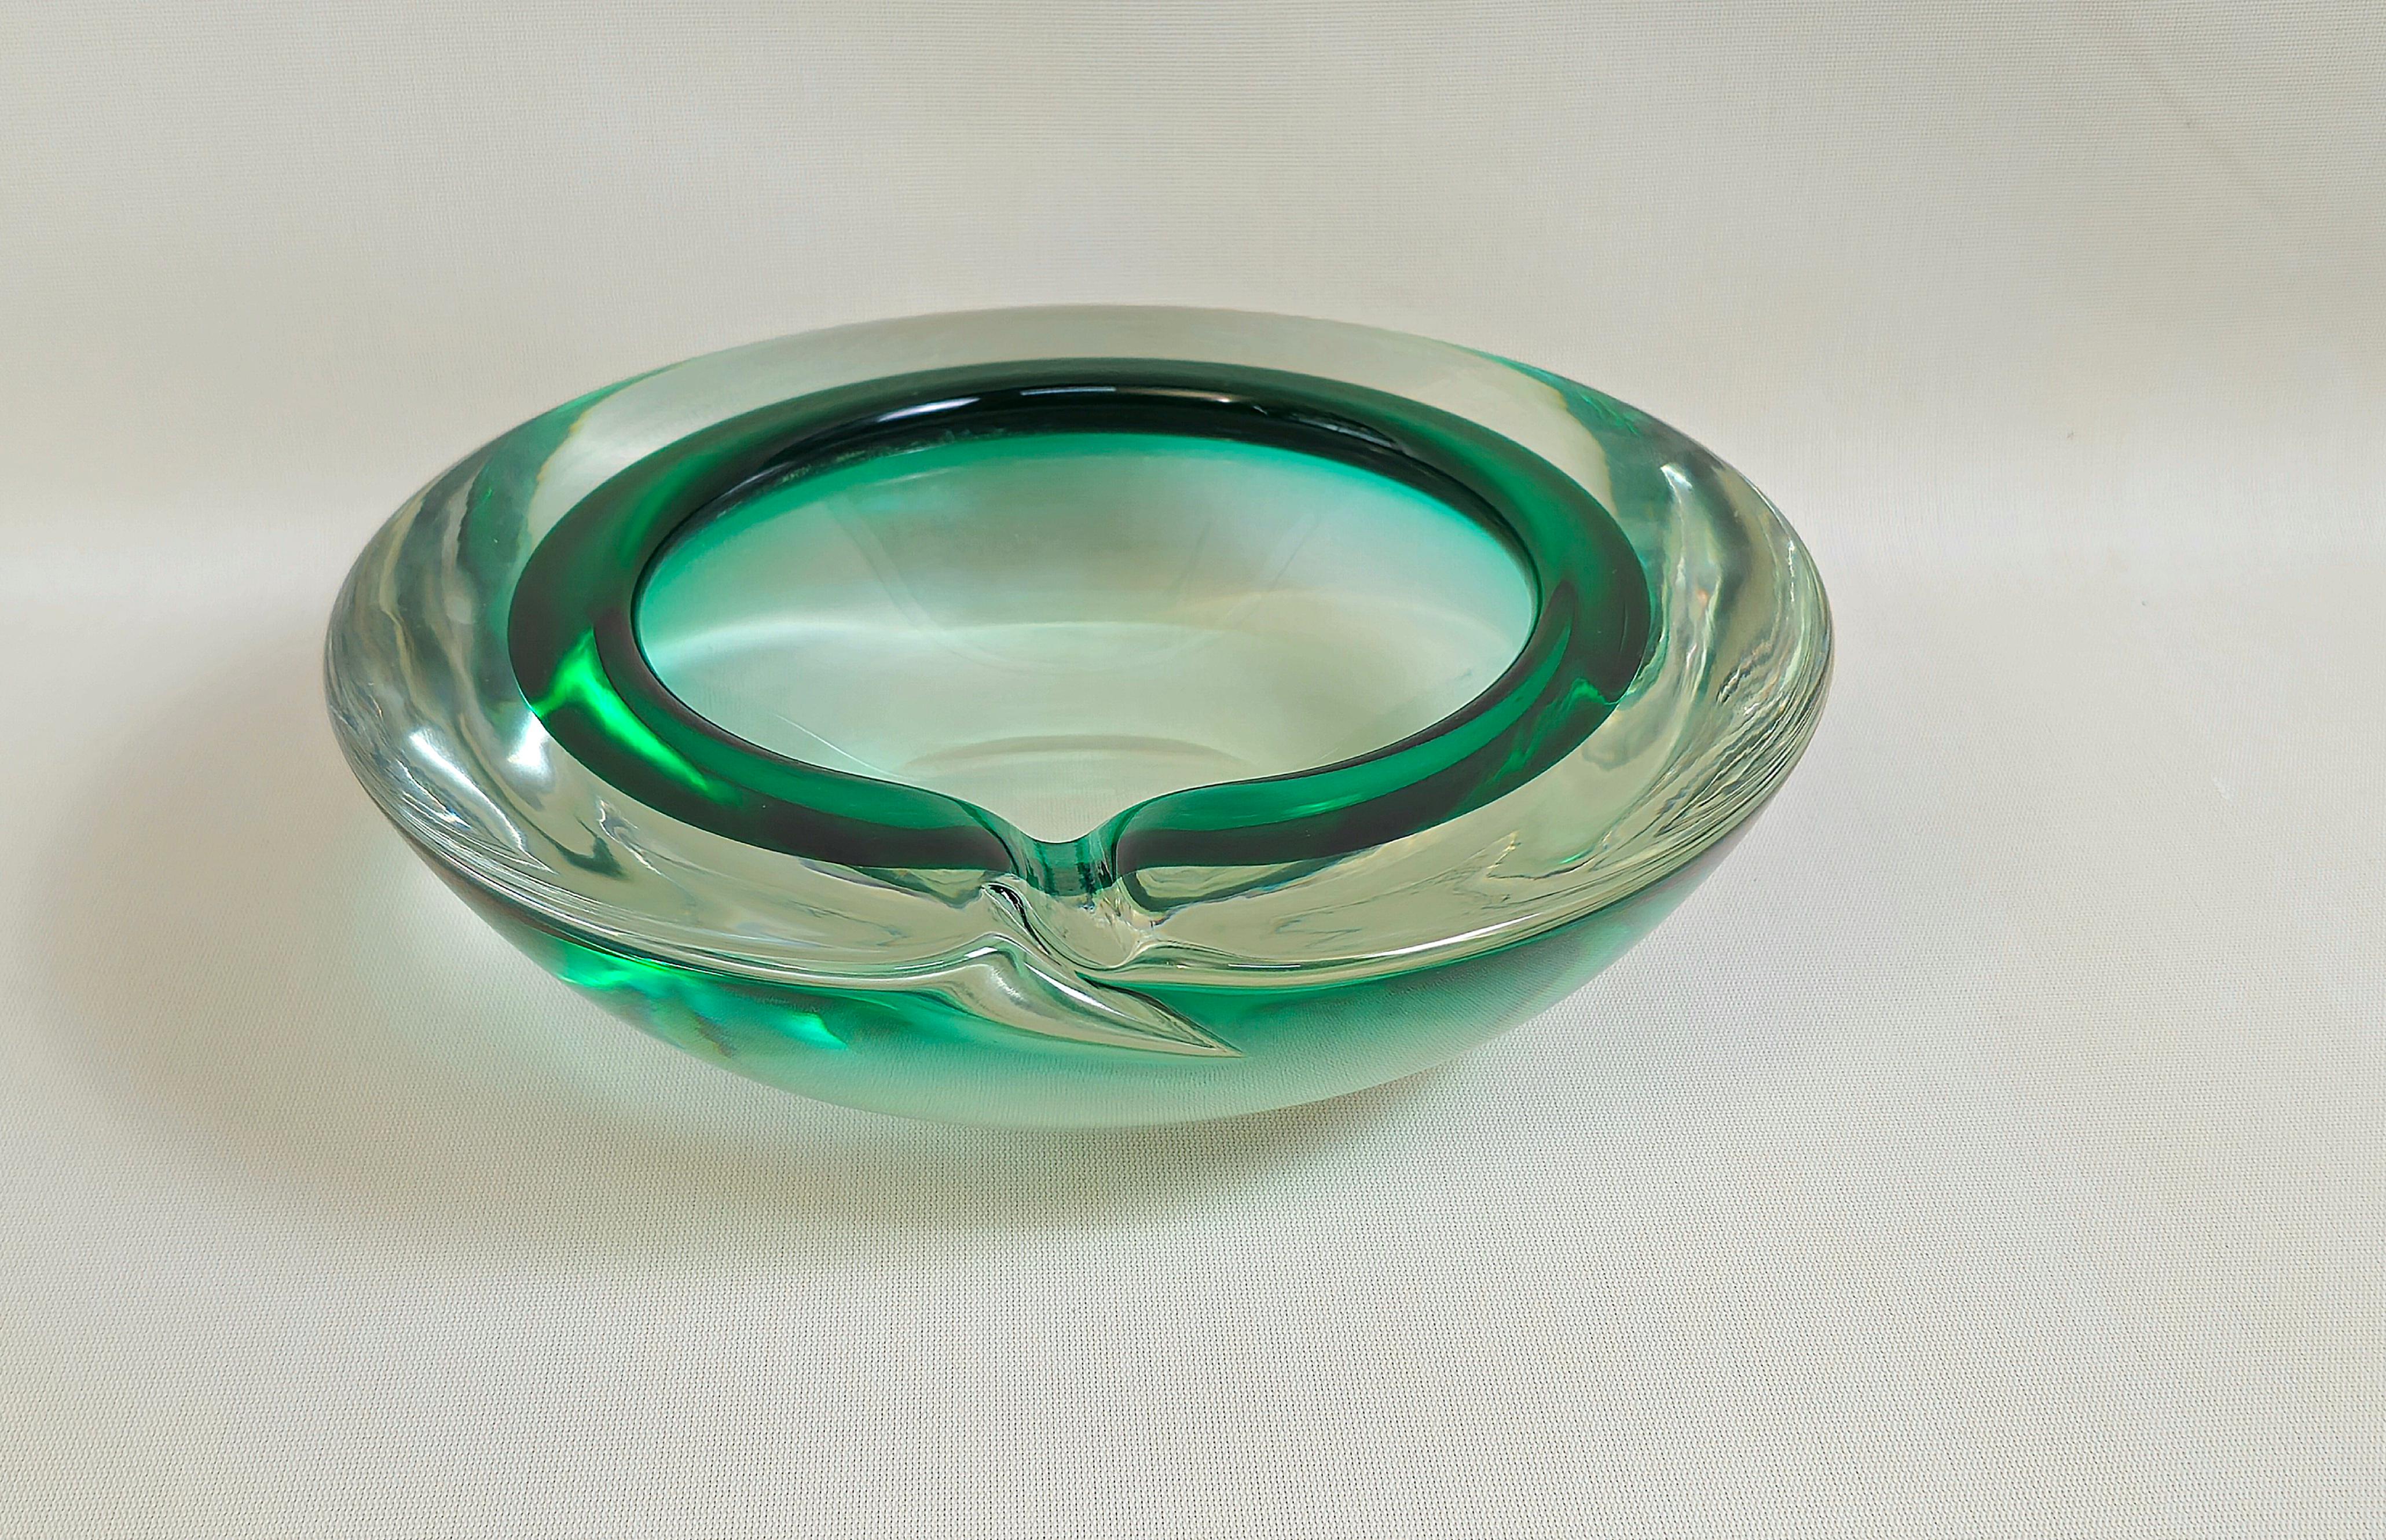 Imposing circular ashtray made of very thick Murano glass, in shades of forest green and transparent. I underline the excellent quality and manufacturing of the glass. Made in Italy in the 60s.

Note: We try to offer our customers an excellent